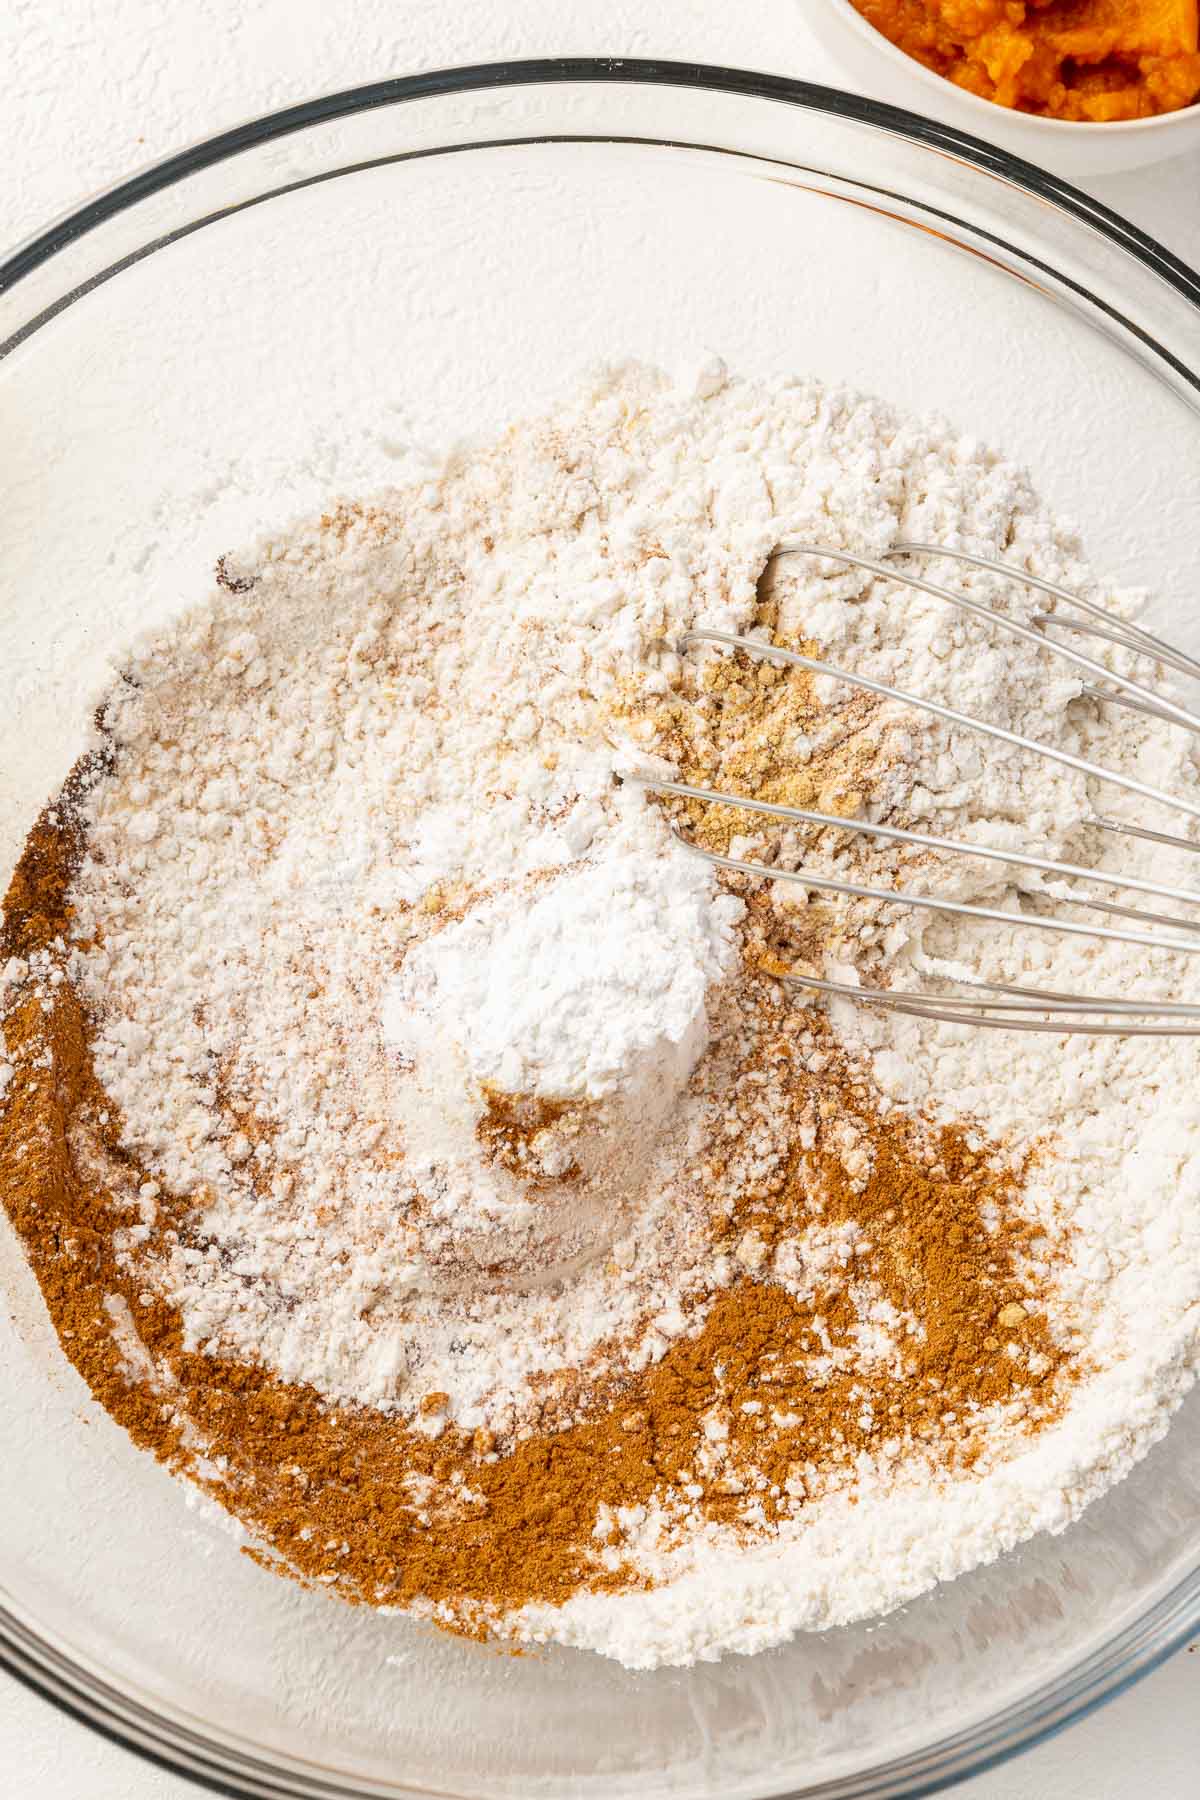 A glass mixing bowl with gluten-free flour, cinnamon, baking soda, baking powder, ginger, cloves, and nutmeg being mixed together with a whisk.